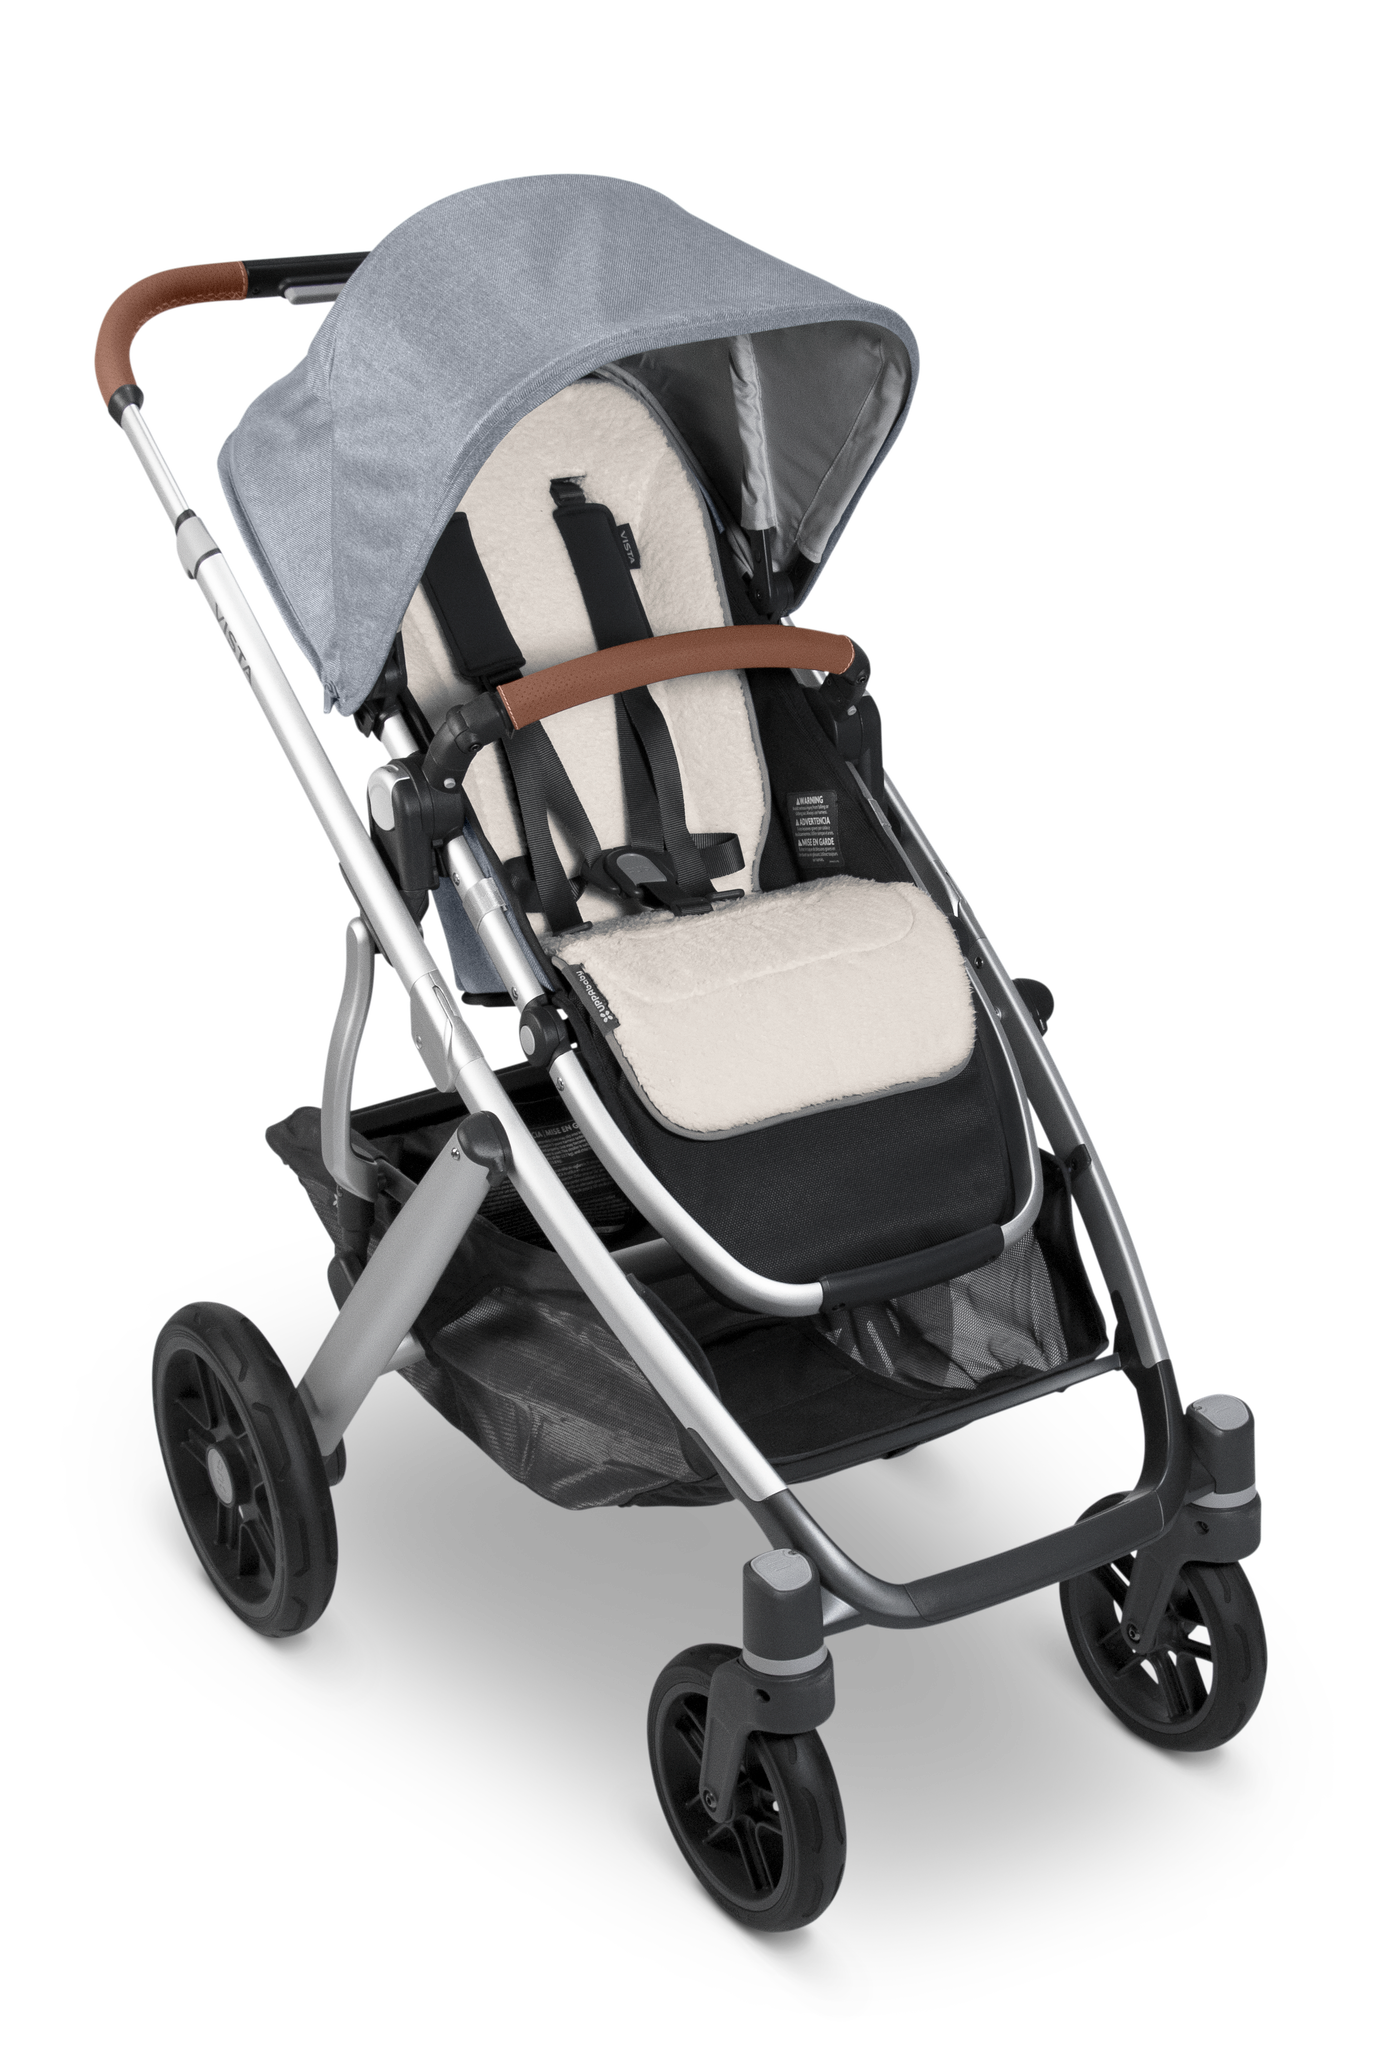 UPPABaby UPPAbaby Reversible Seat Liner - Phoebe (Grey)